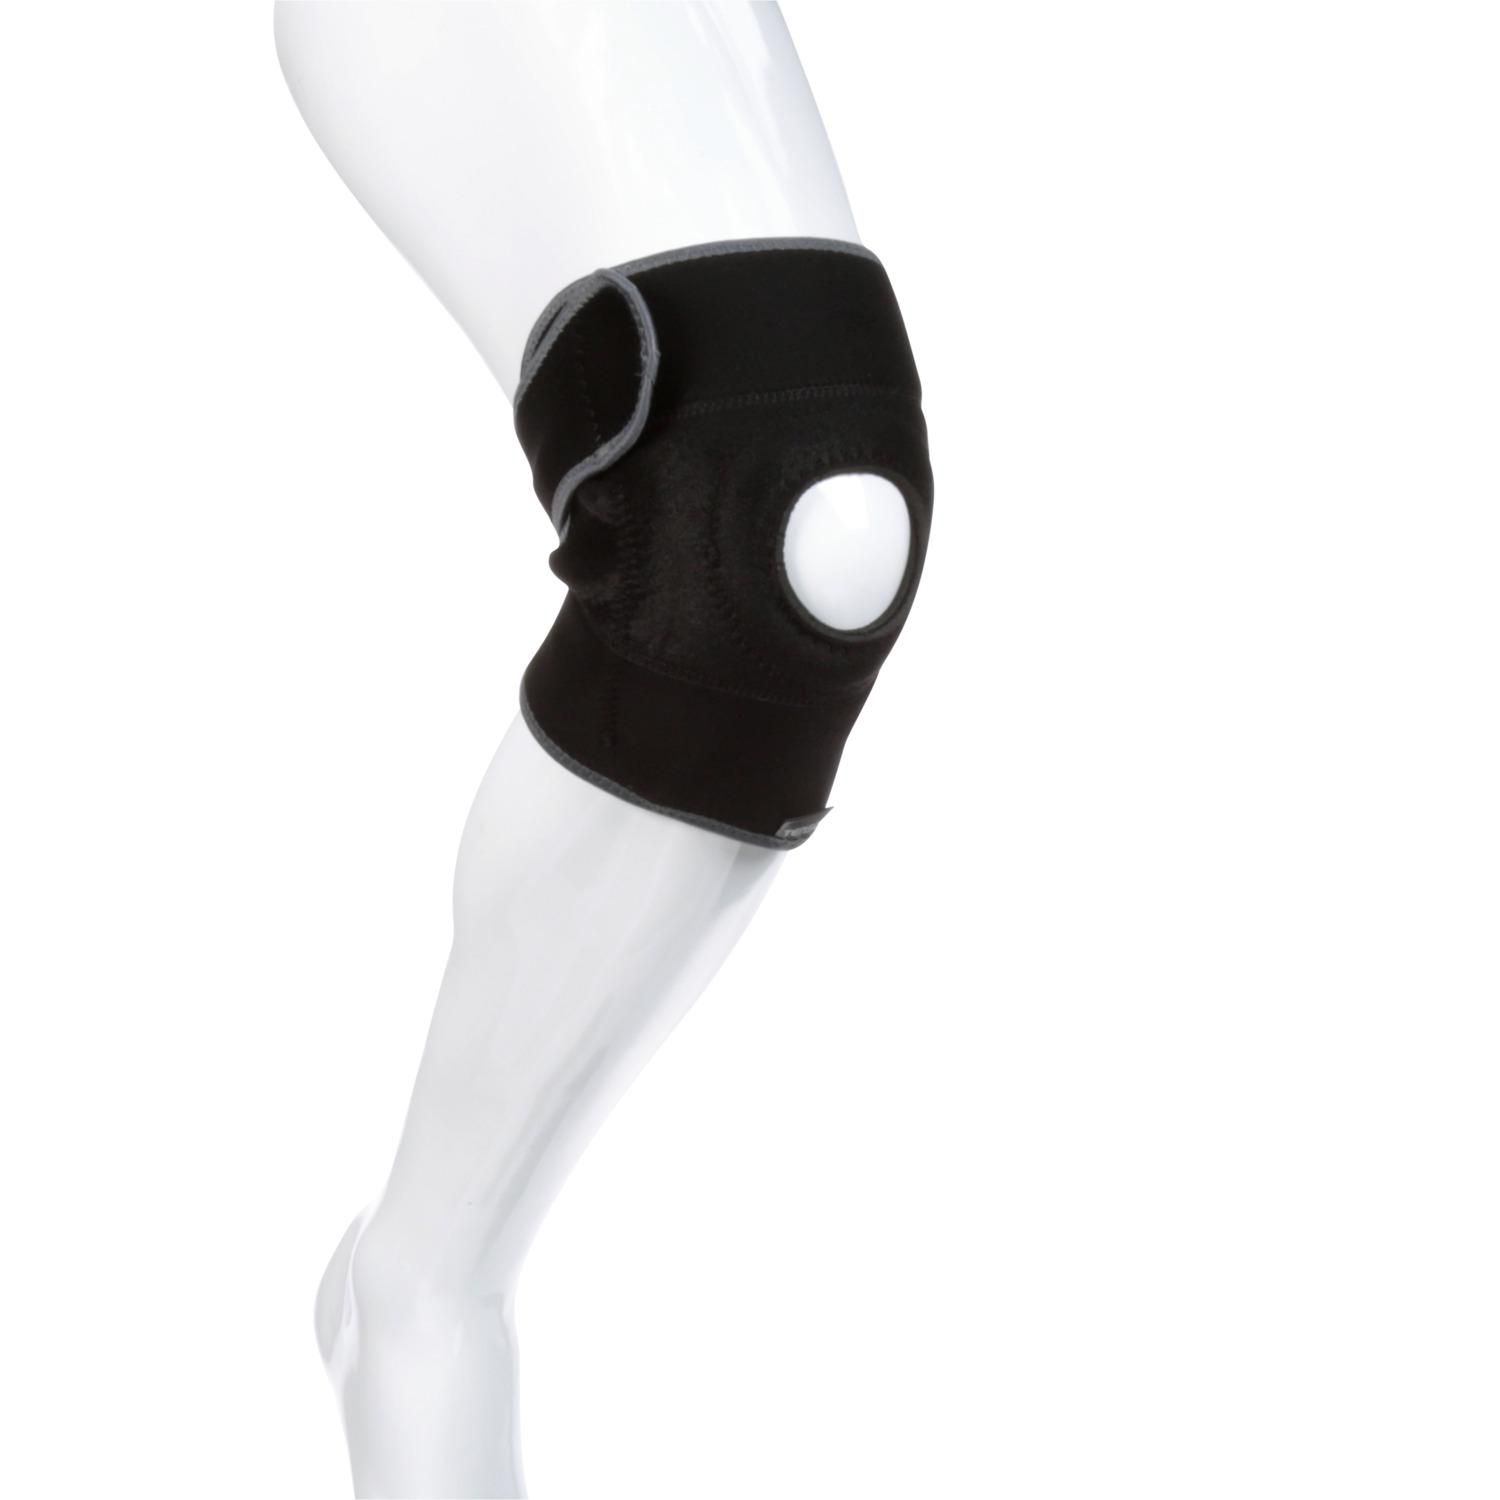 Tensor™ Adjustable Knee Support Brace with Dual Side Stabilizers, Black